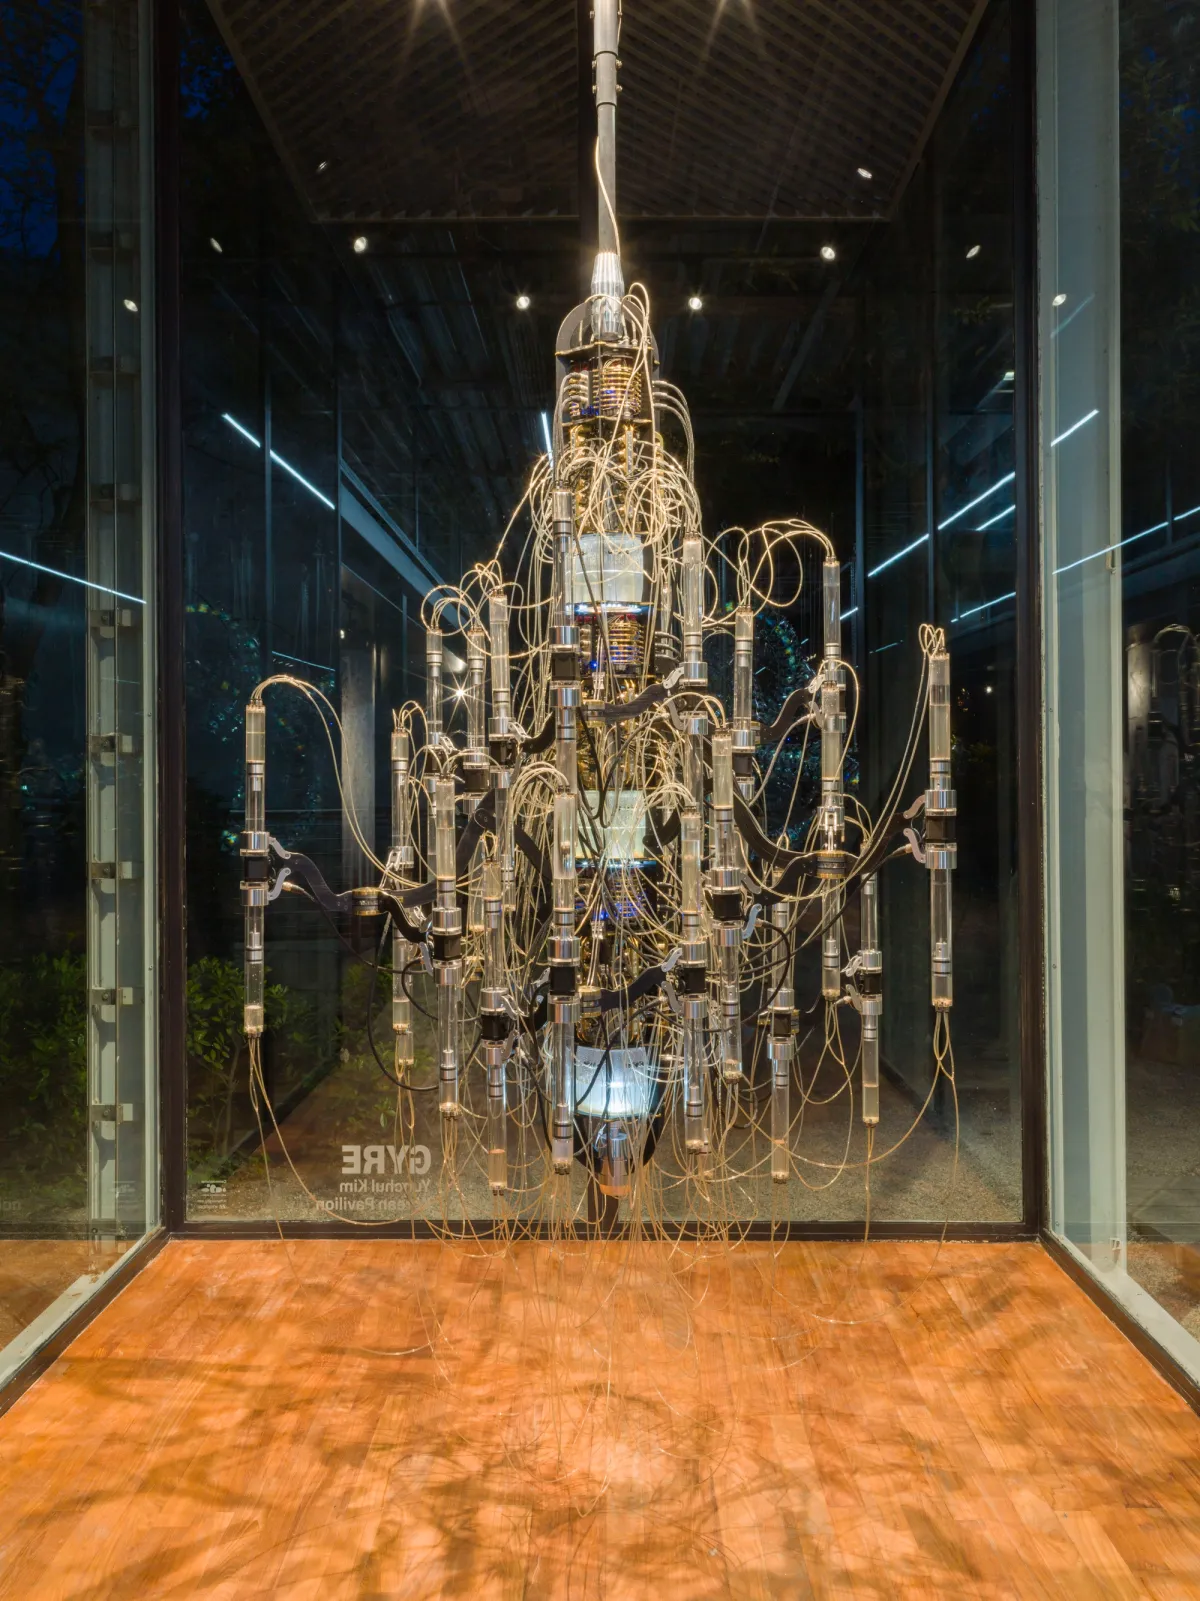 Artistic installation resembling a chandelier with intricate design, hanging at the Korean Pavilion in 2018, produced by Yunchul Kim.